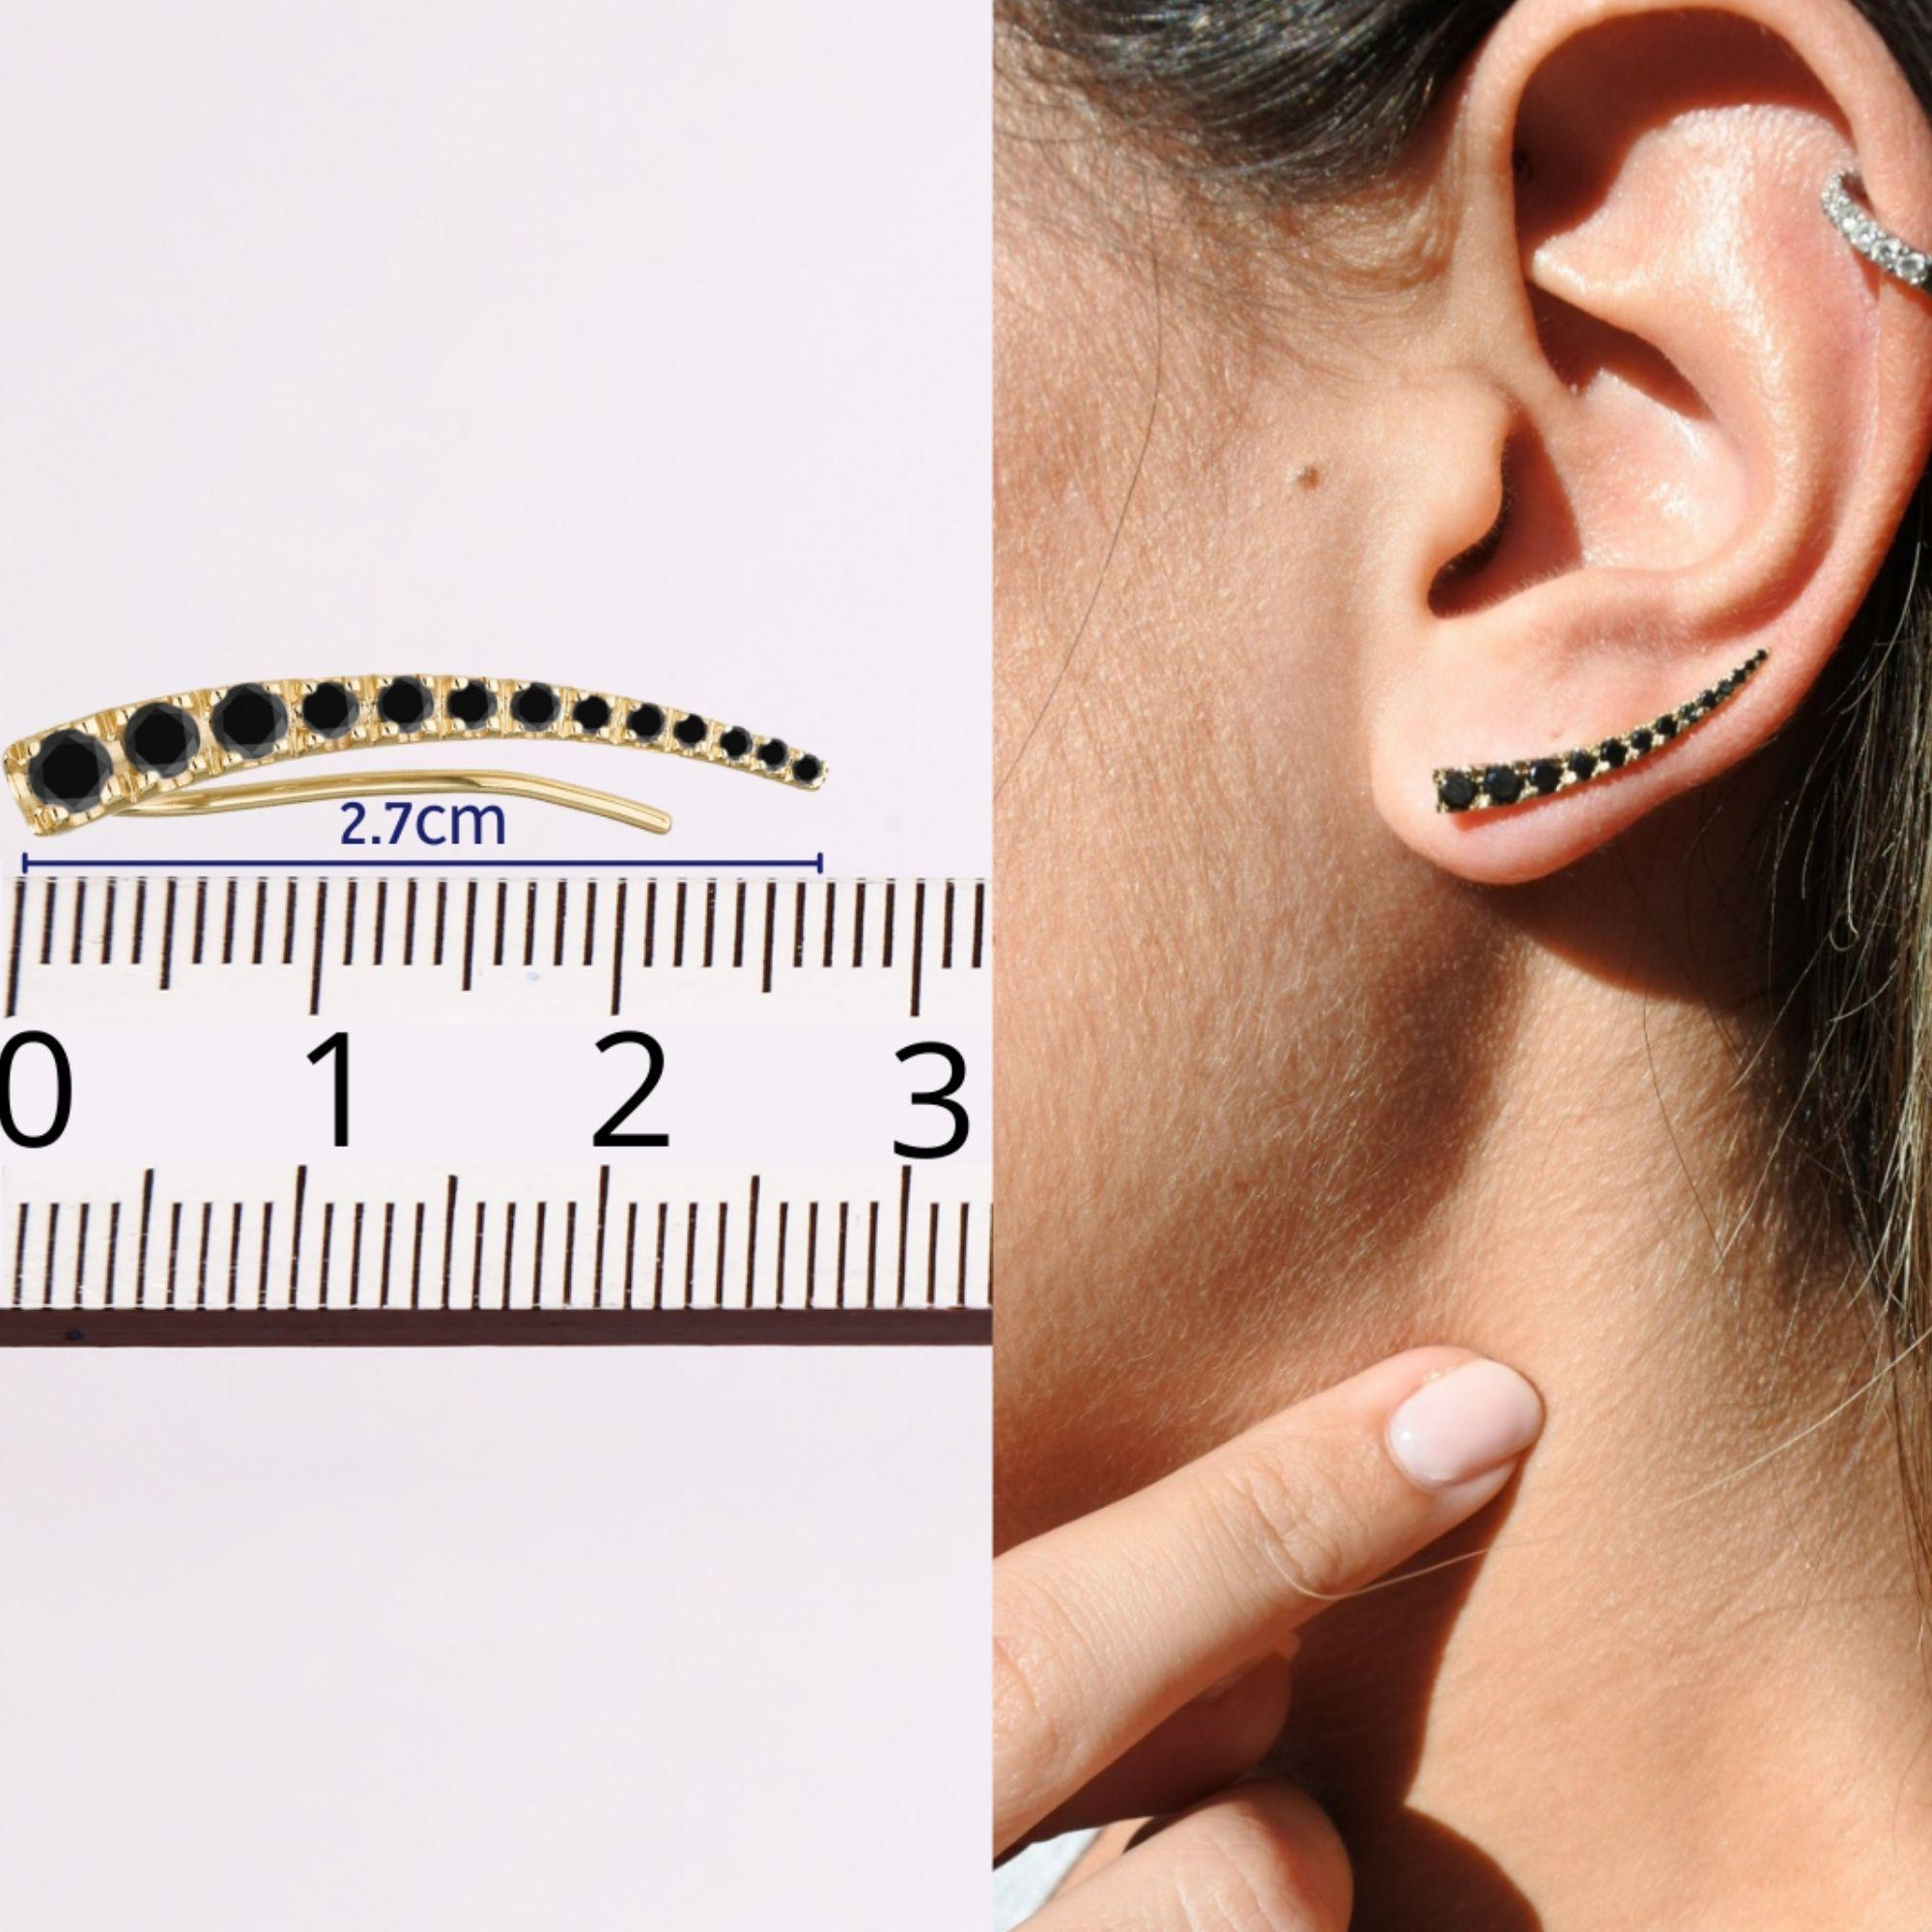 0.30 Carat Real Black Diamond Ear Climber 14K yellow Gold - Shlomit Rogel

A classy and chic 14k yellow gold ear climber for a truly elegant look. Embellished with 13 black diamonds, this beautifully handcrafted earring will upgrade your everyday